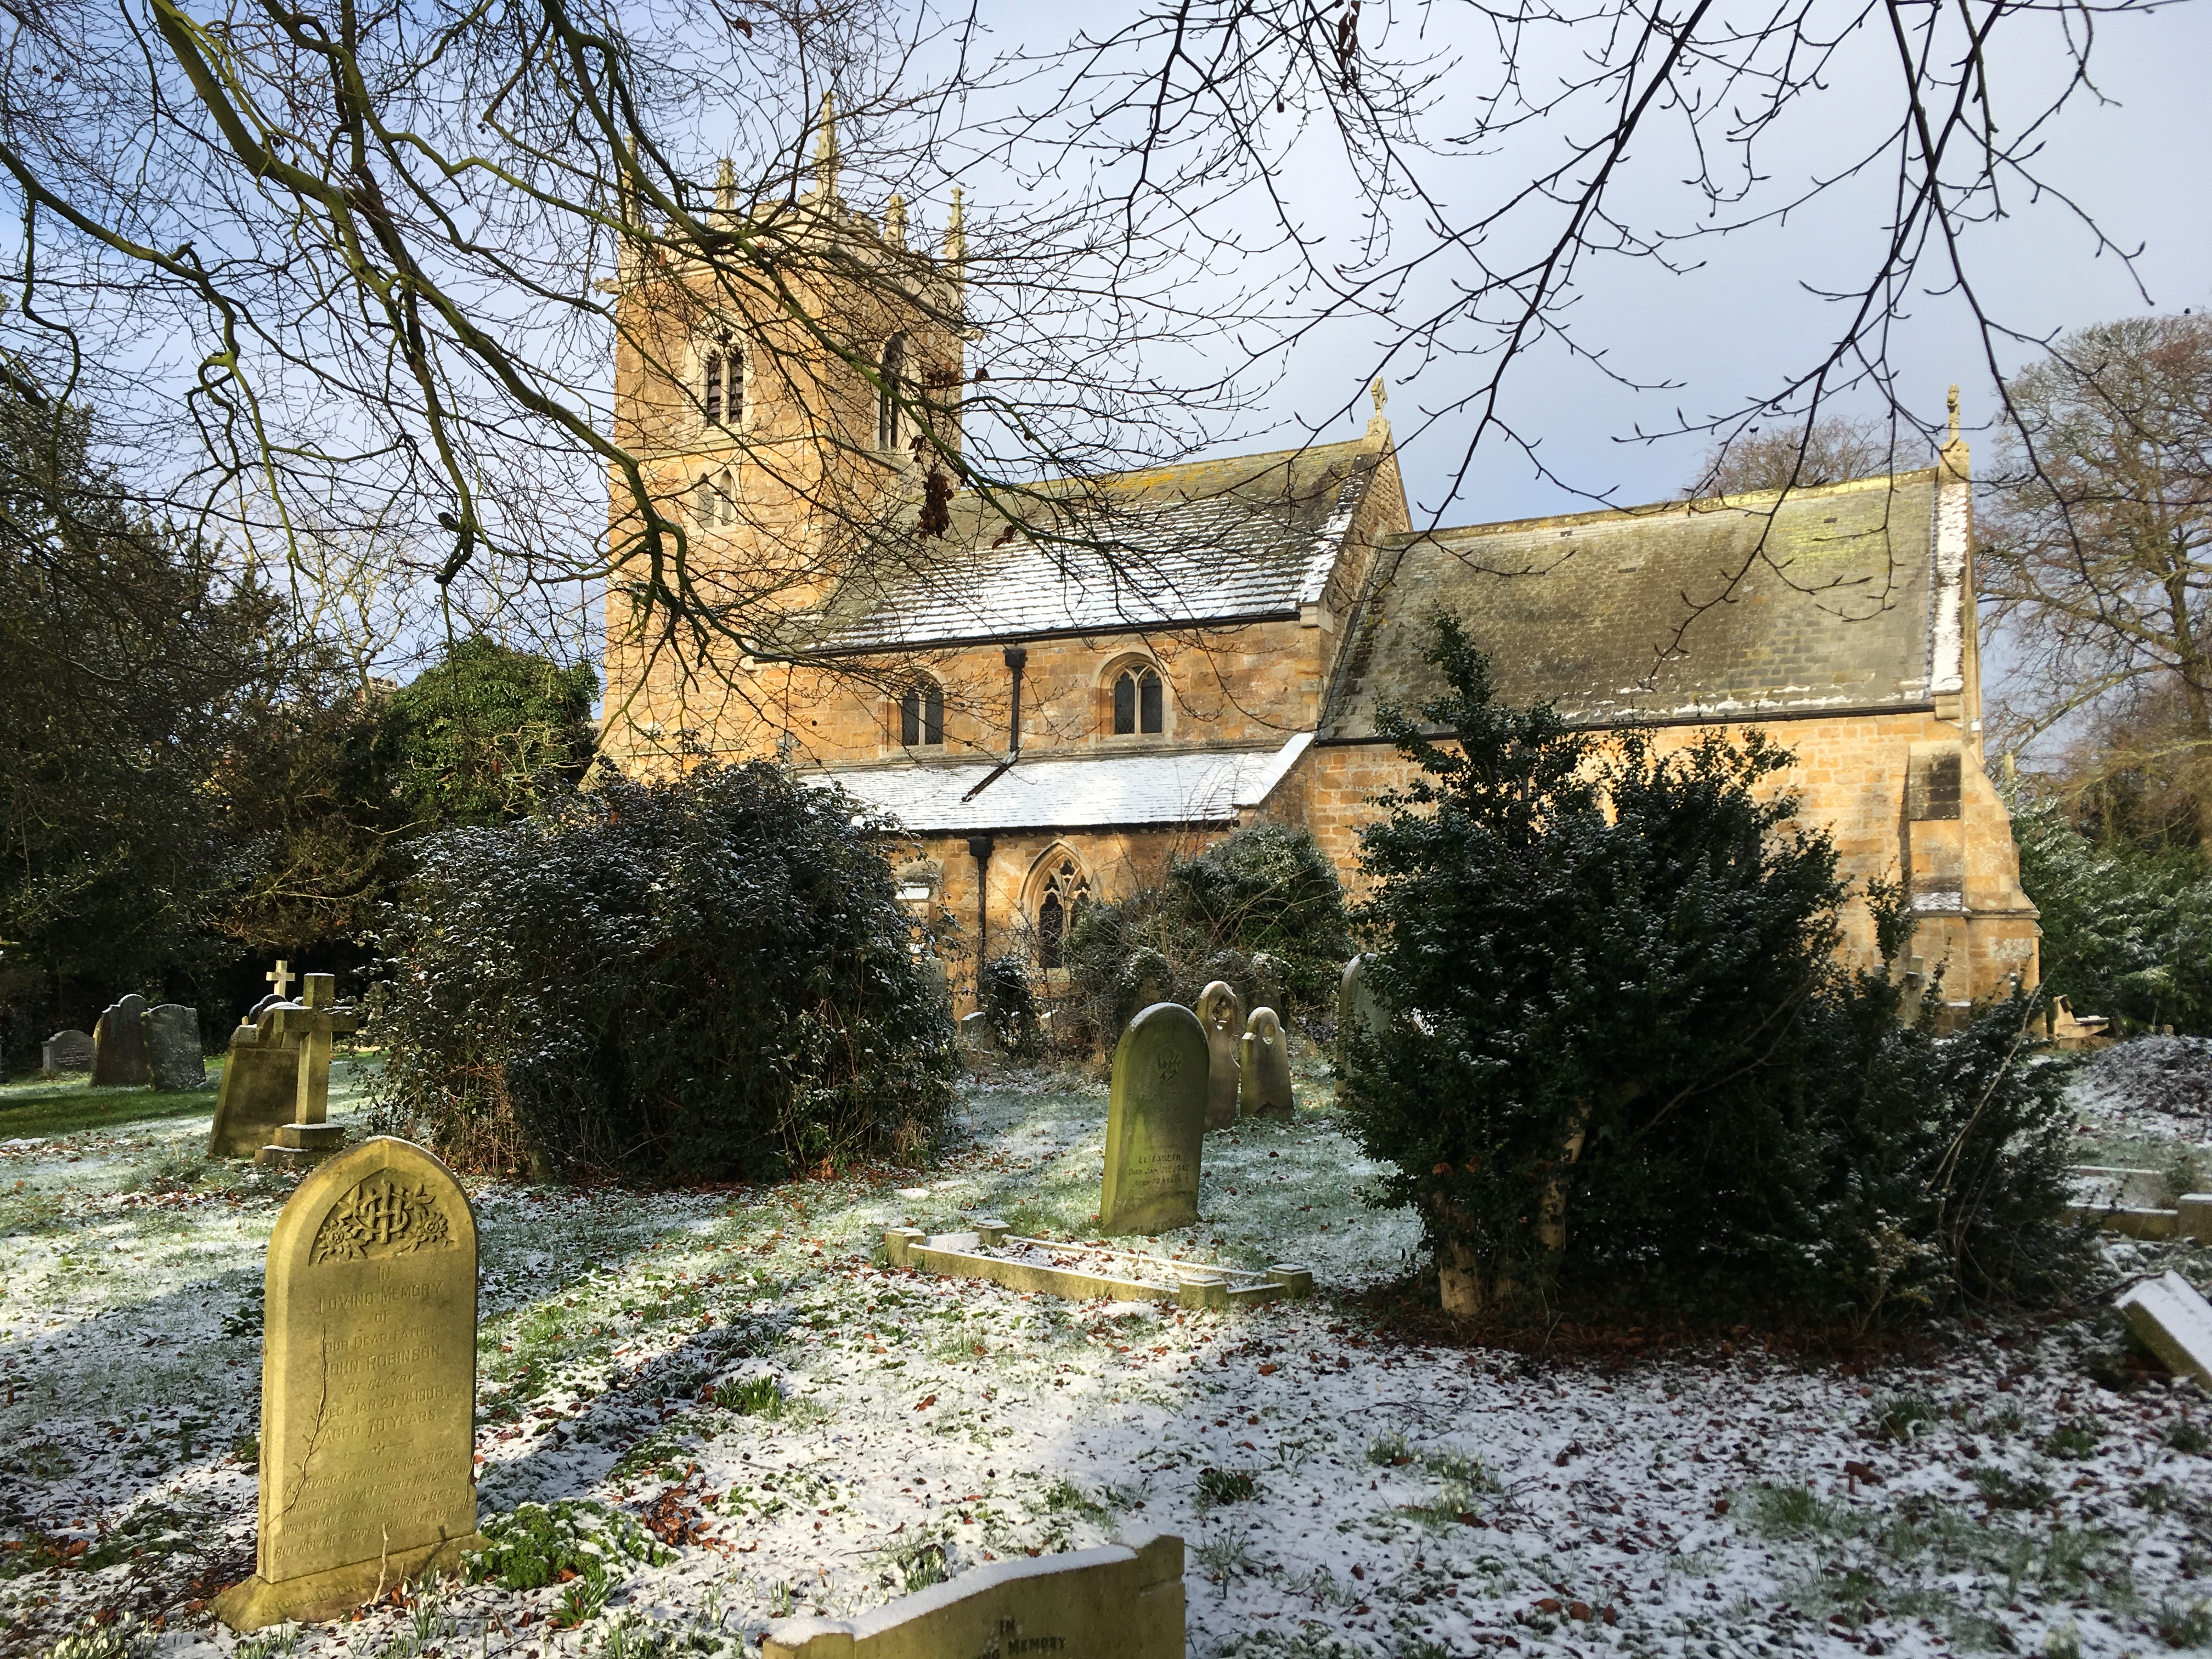 The picture shows St Mary's Church in winter